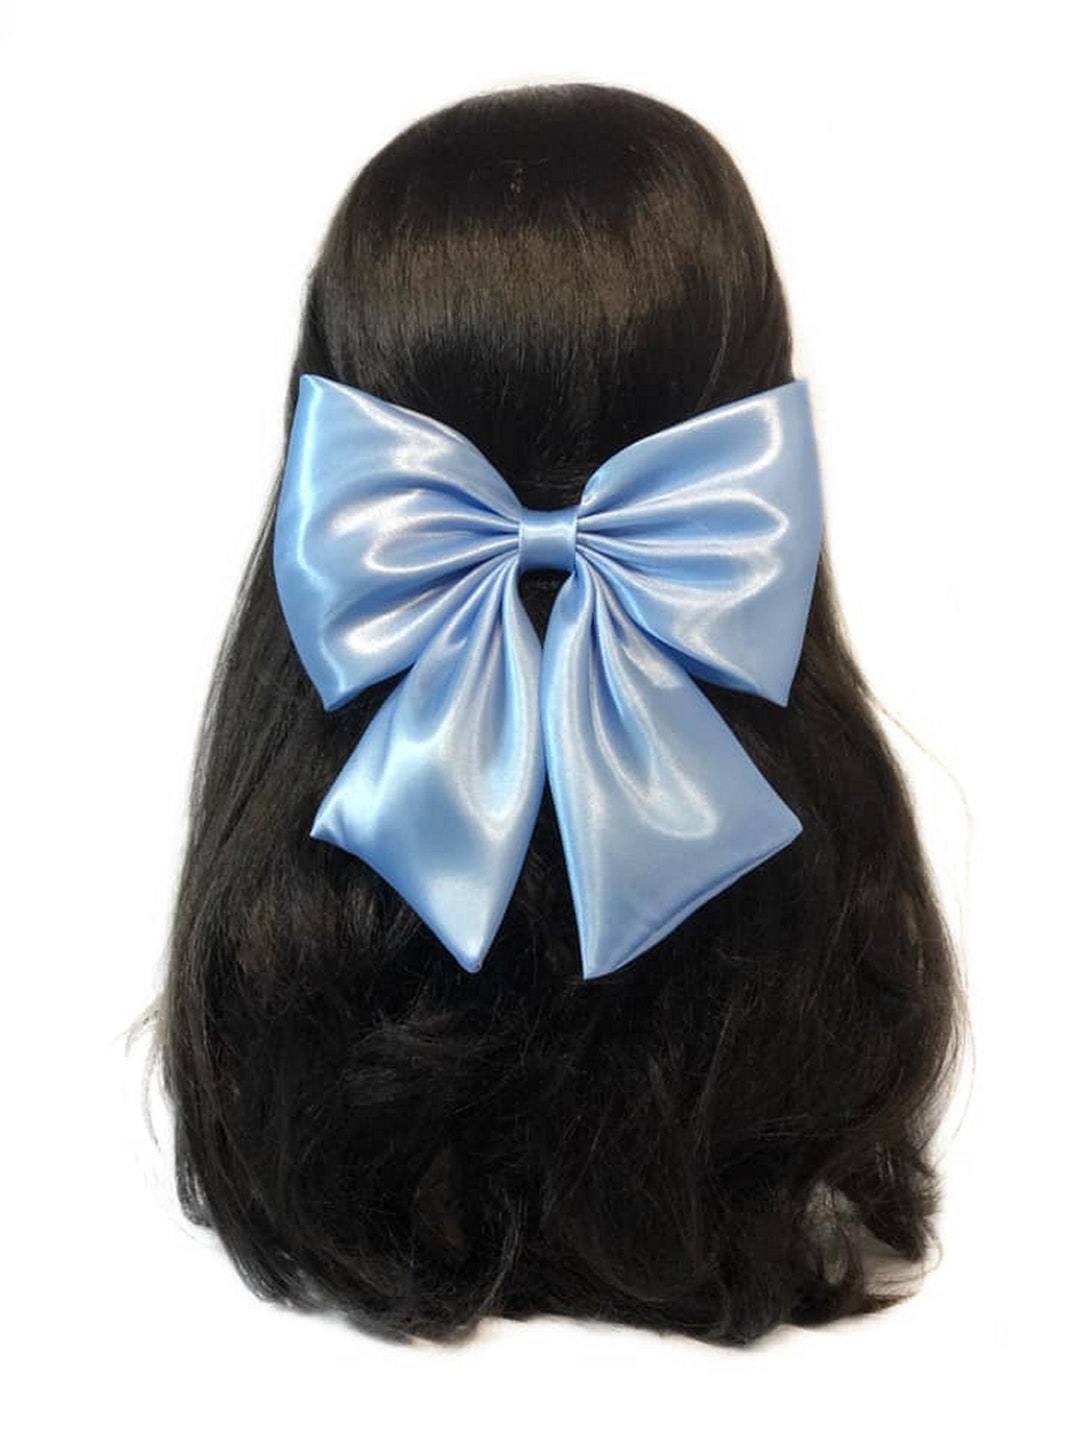 Big Bow Hair Clips 2pcs, Long Tail French hair Bows for Women Girl, Satin  Silky Bow Hair Barrette, Light Blue Purple Bow Hair Dress Up Accessories  for